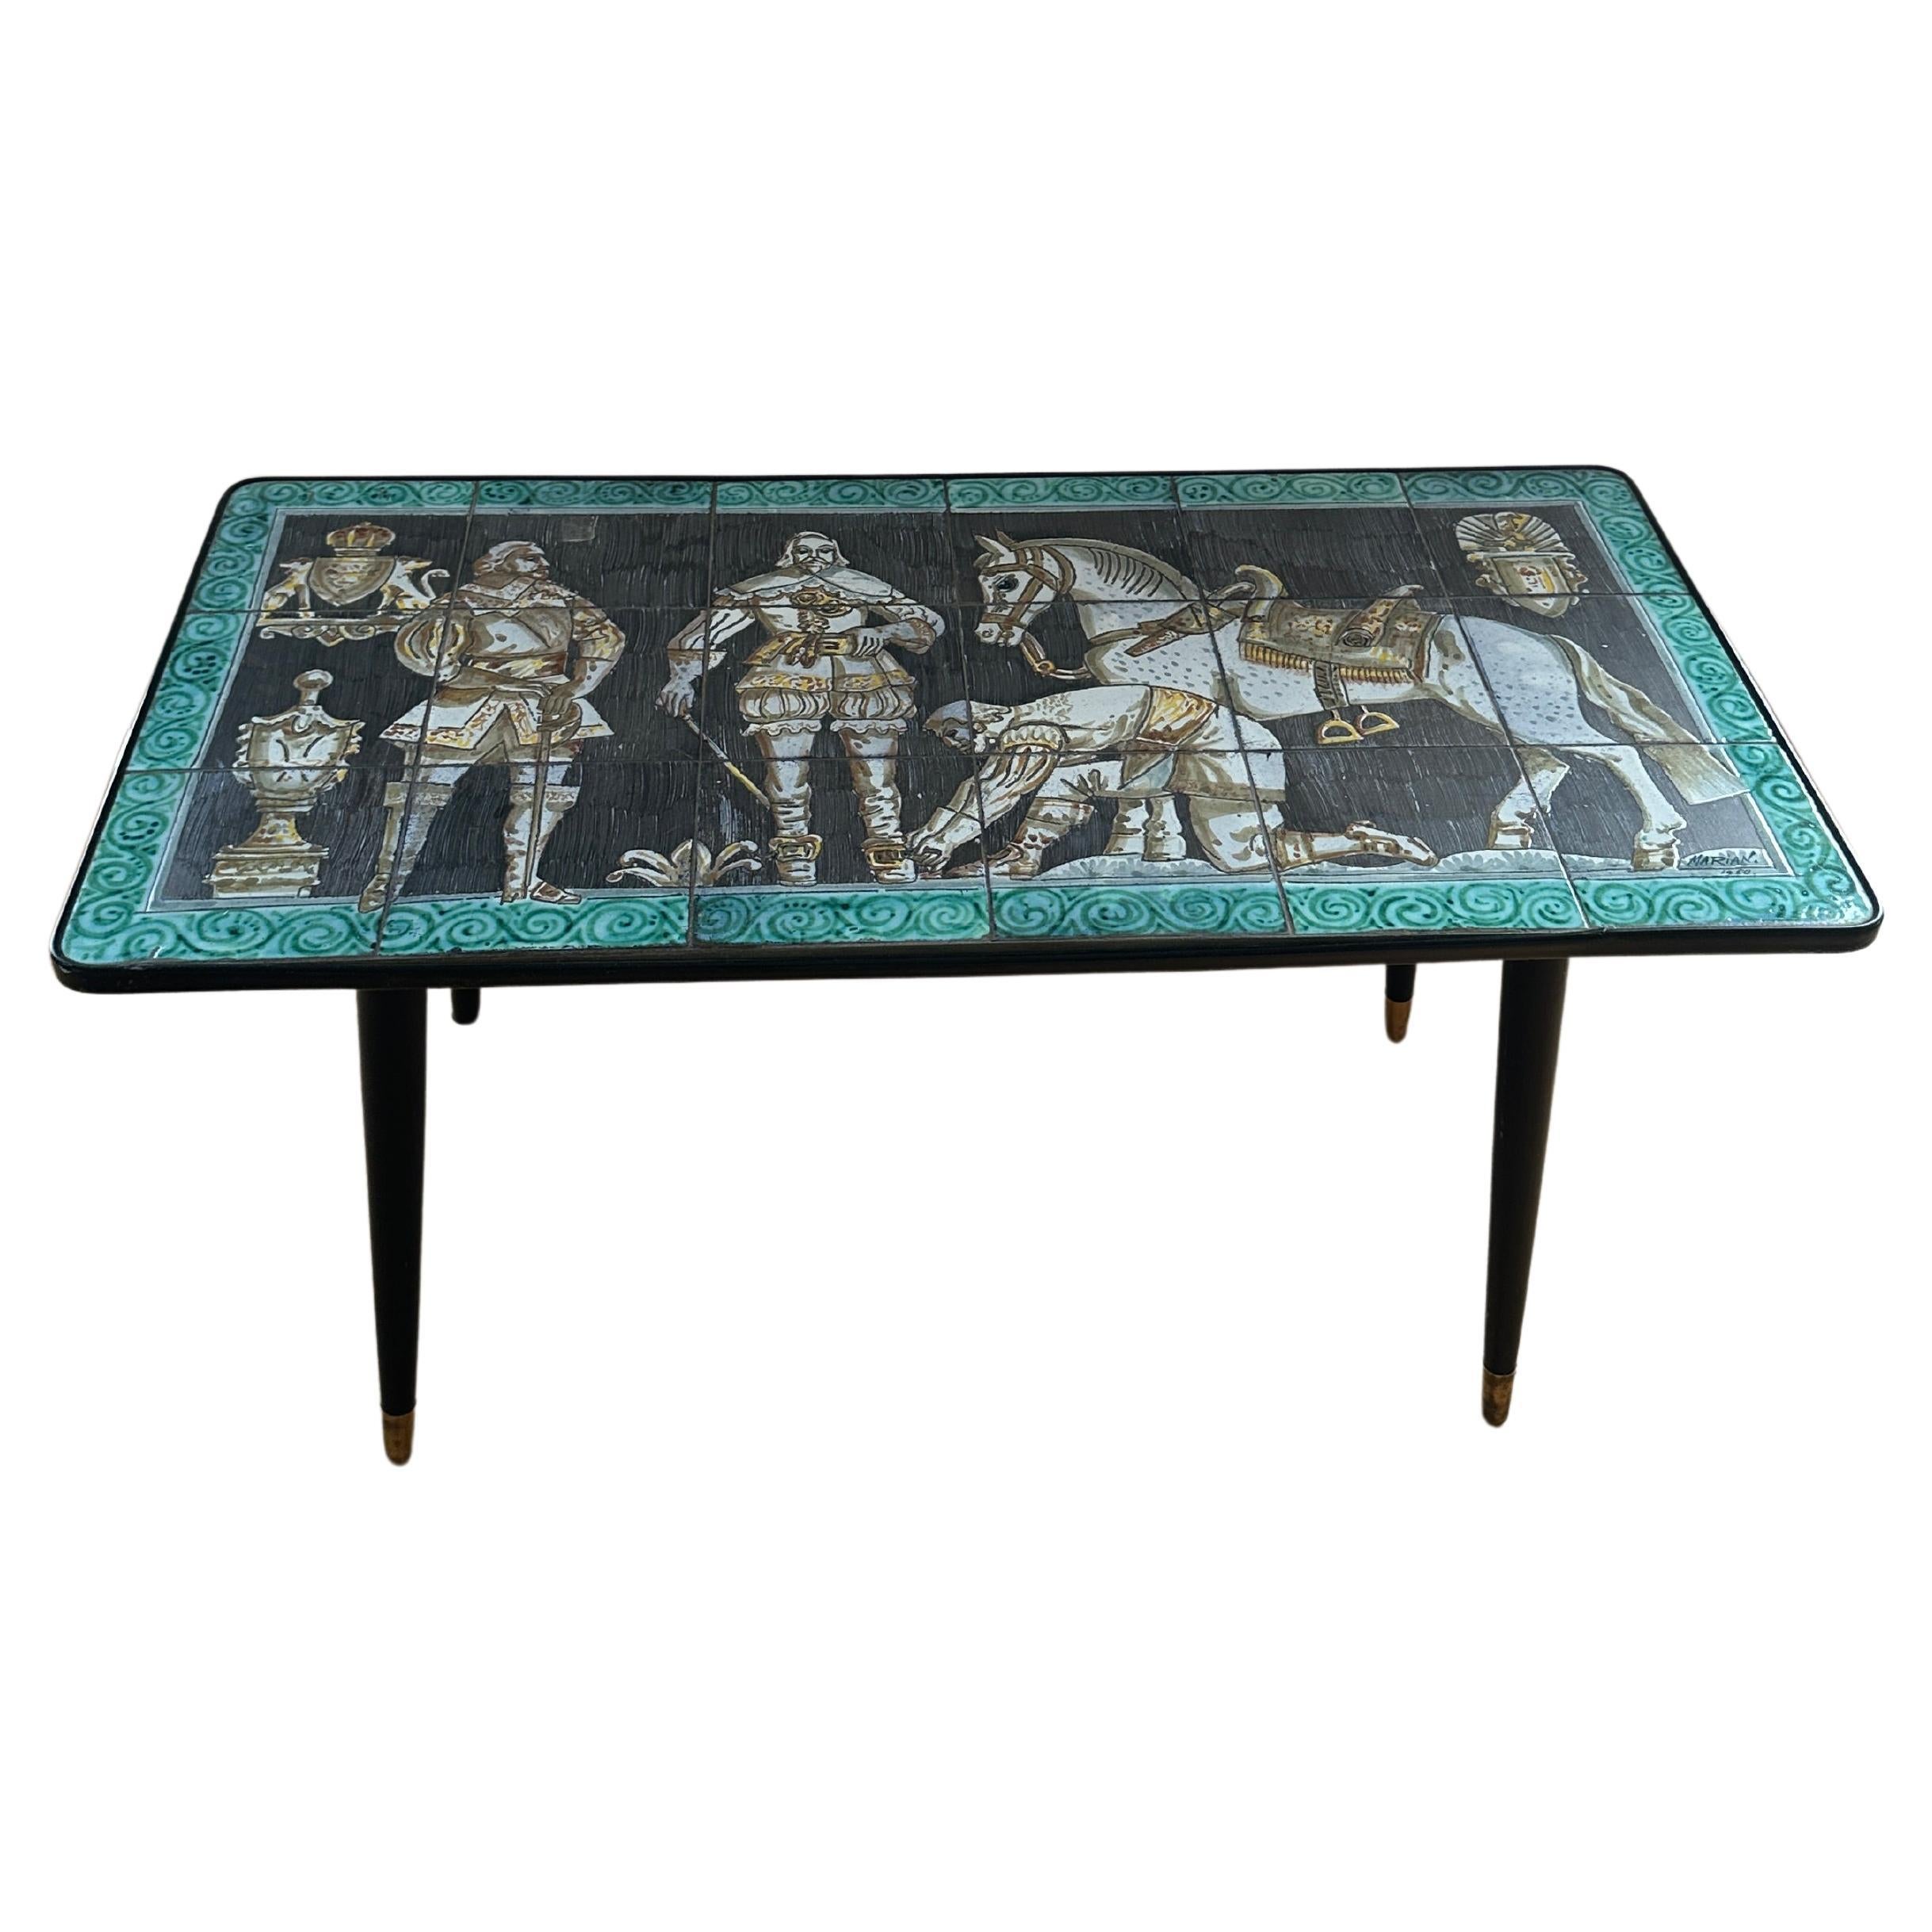 Tilgmans table by Marian Zawadzki  Sweden Signed and dated 1960 For Sale